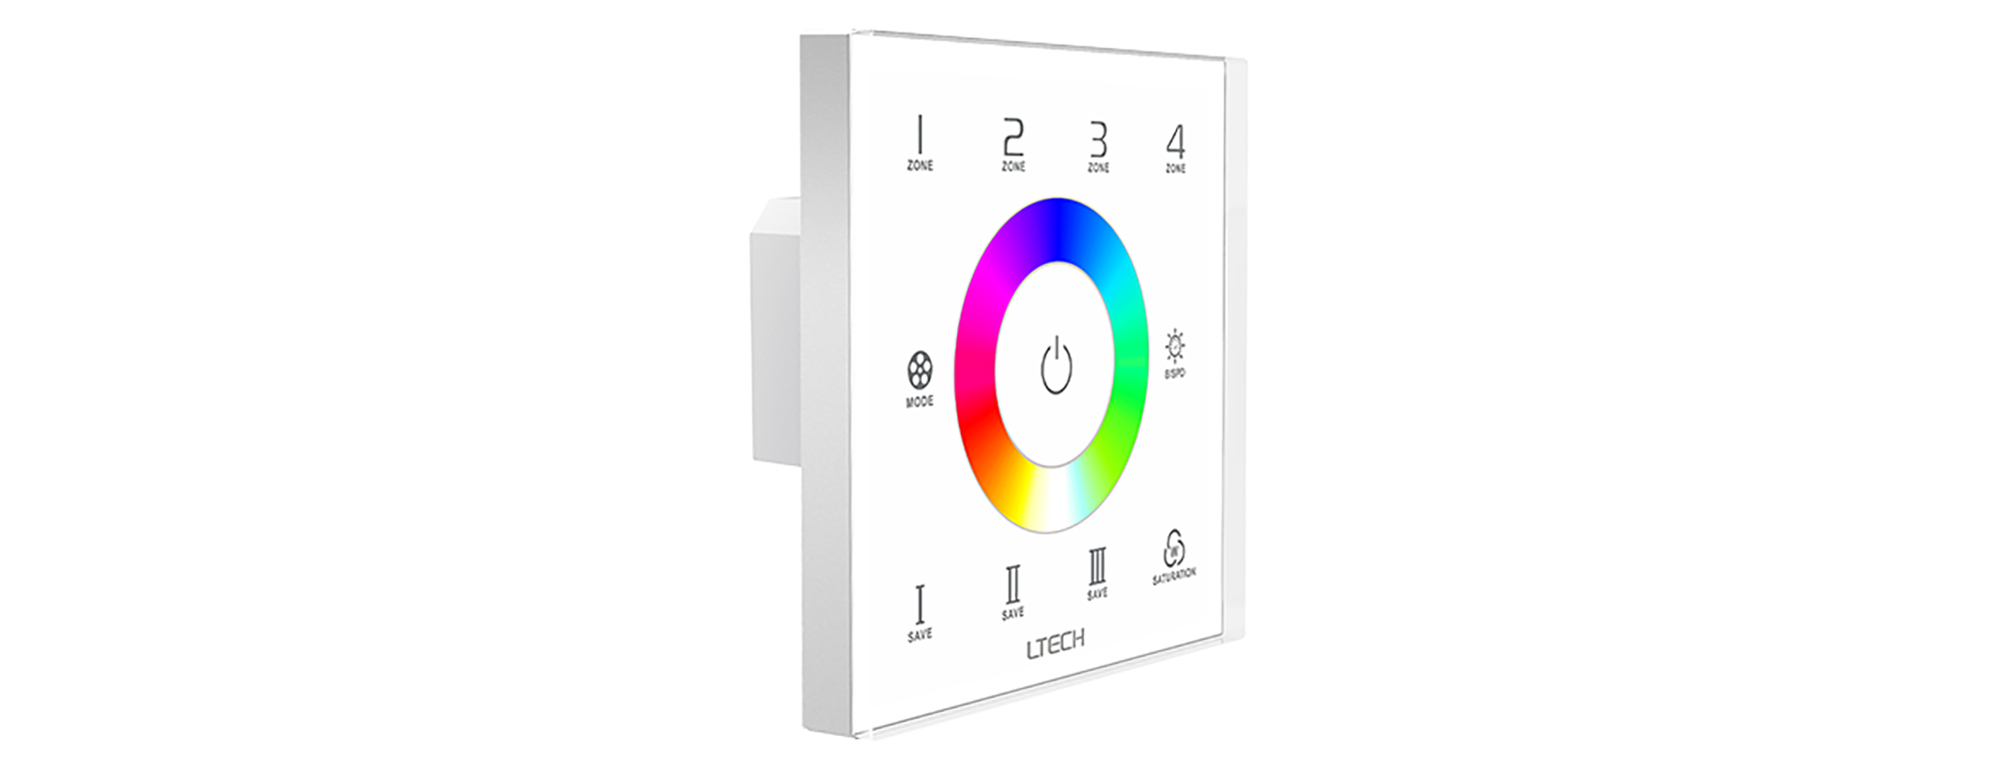 EX7S  RGB Touch Panel 4 Zones, RF 2.4GHz, DMX512 interface, Capacitive touch, 100-240Vac input, IP44.